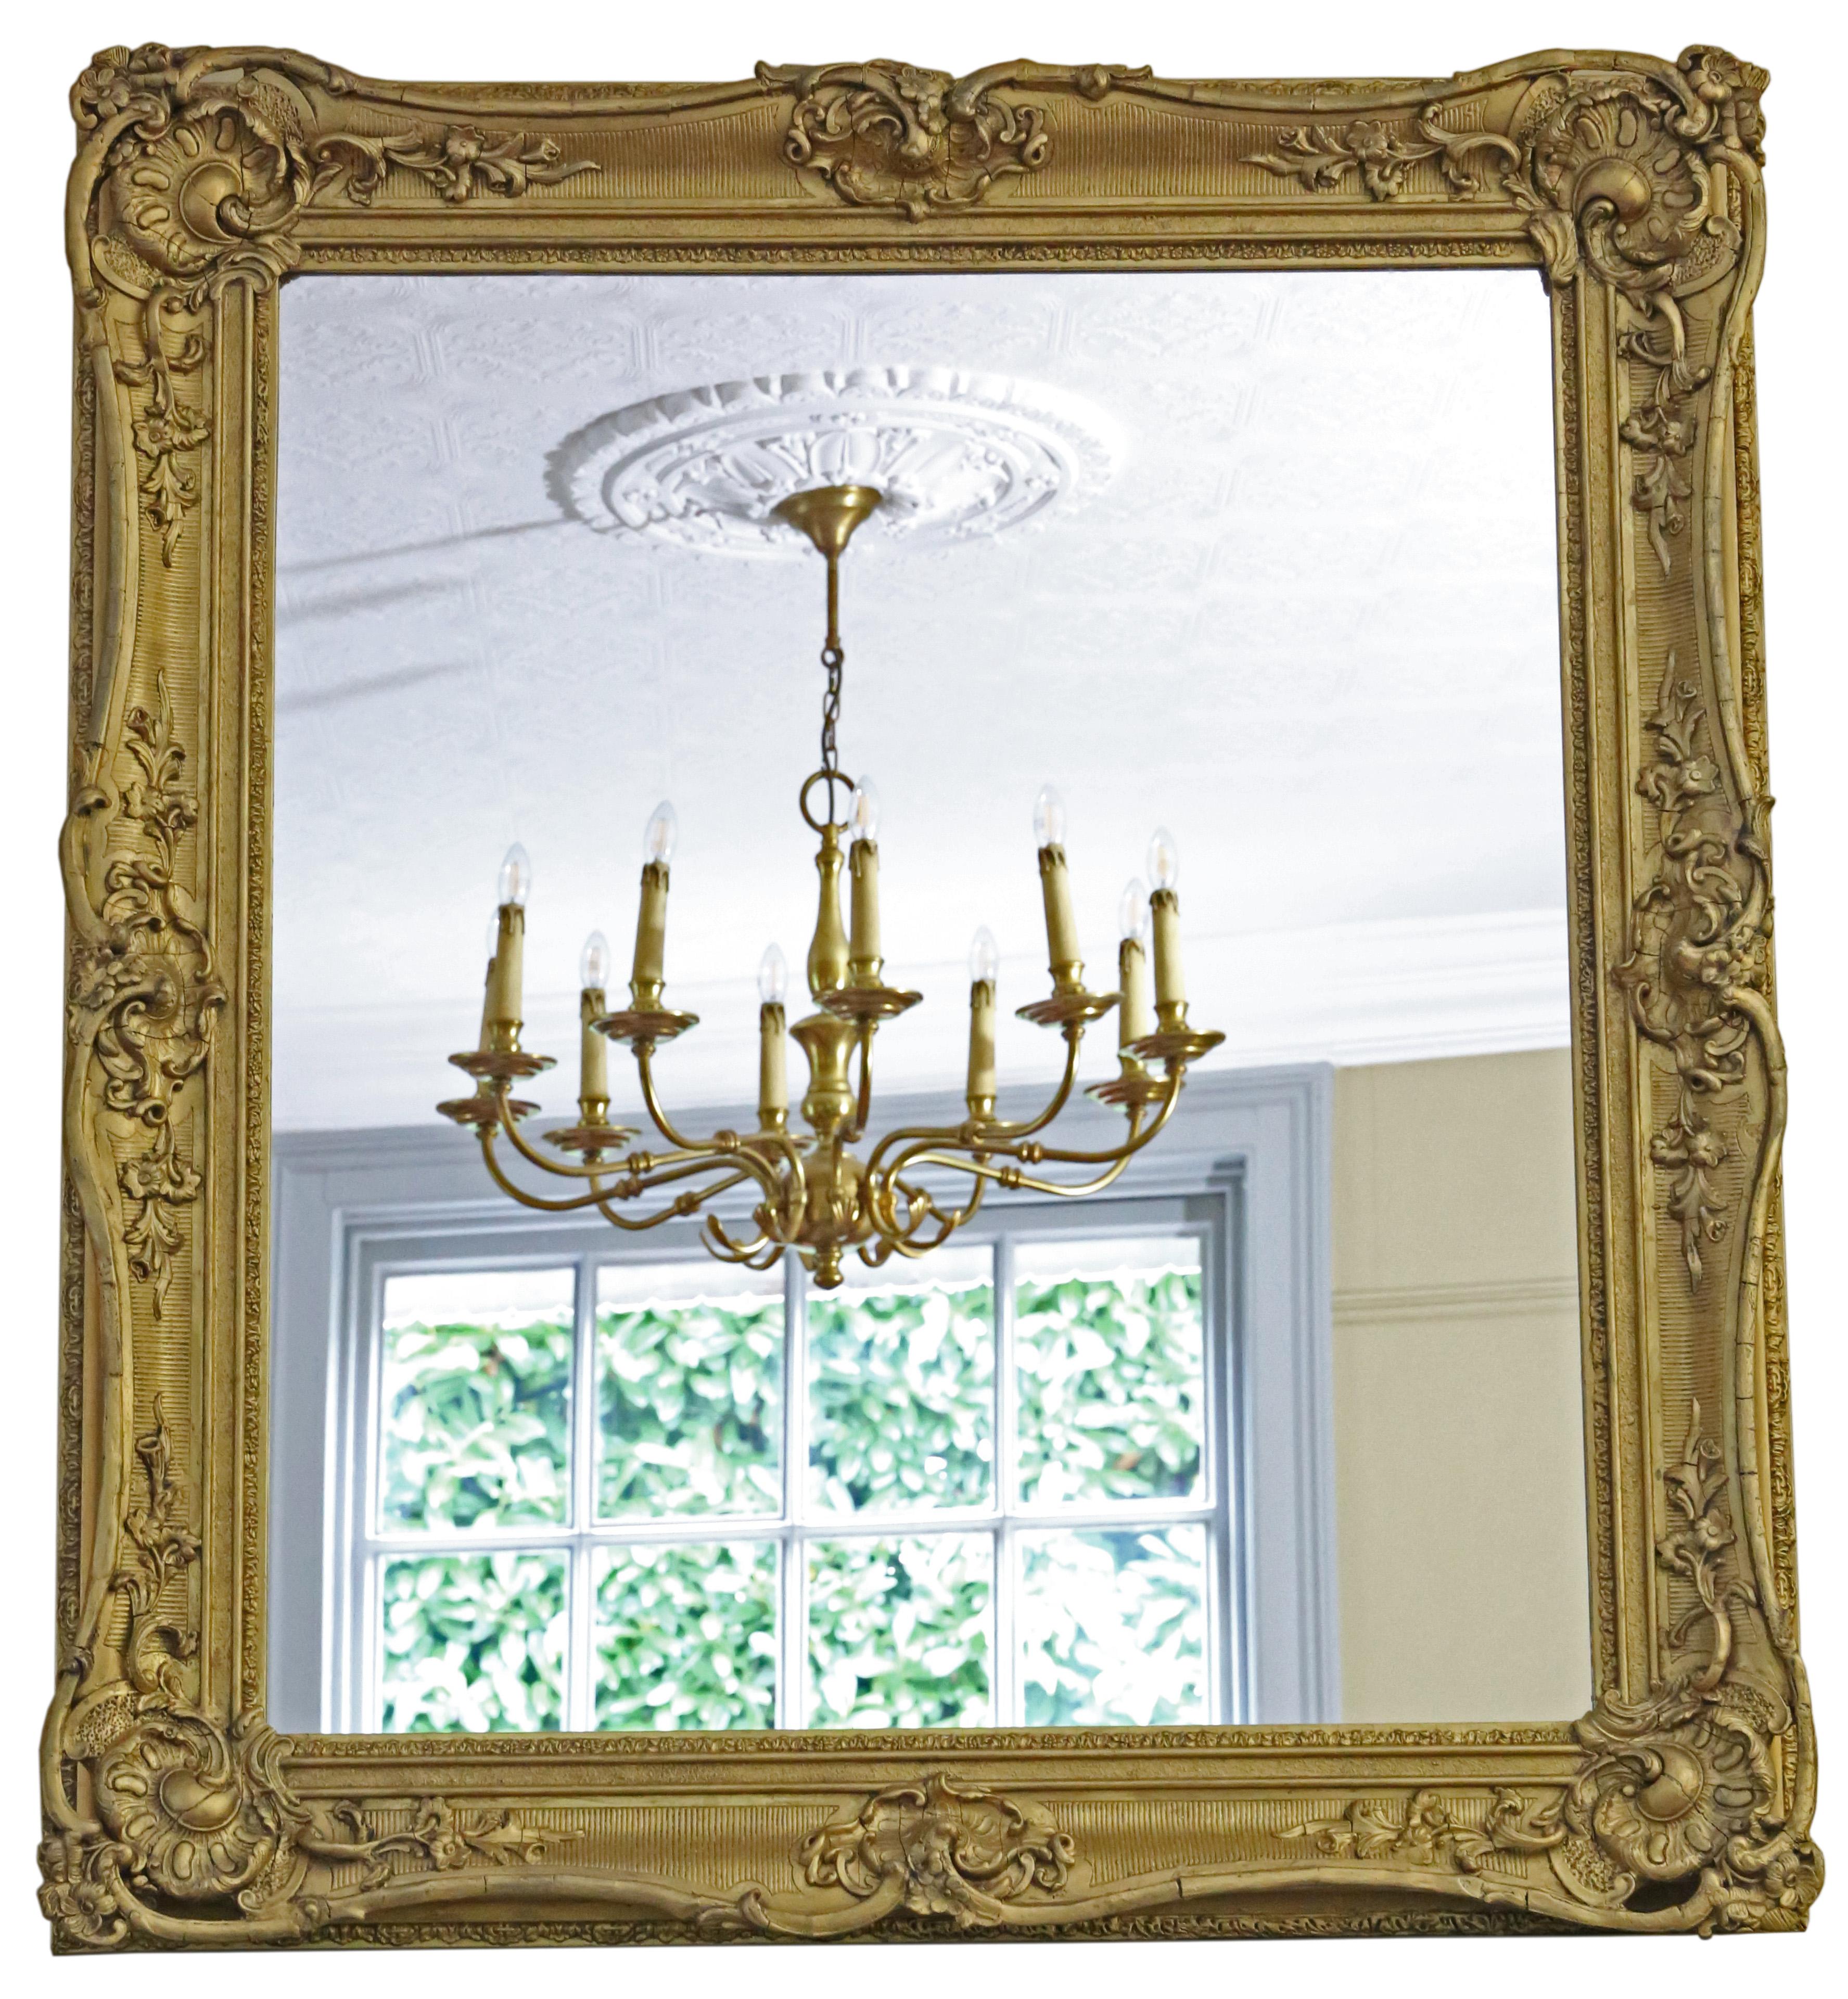 Antique 19th Century large quality gilt overmantle wall mirror. Lovely charm and elegance.

This is a lovely, rare mirror. A bit different and quite special.

An impressive find, that would look amazing in the right location. No loose joints or